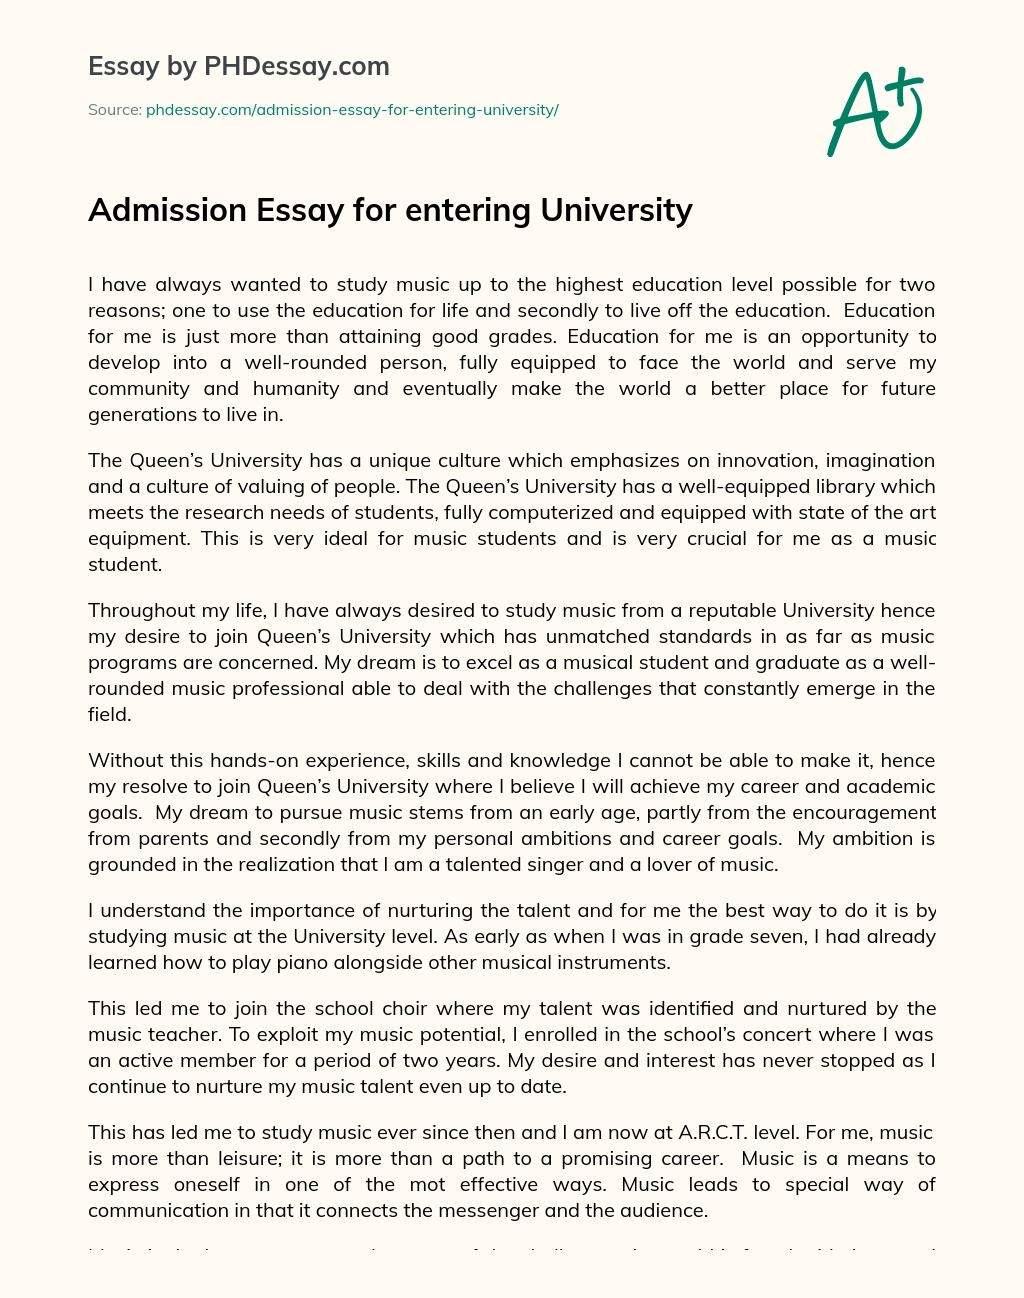 reasons for going to university essay